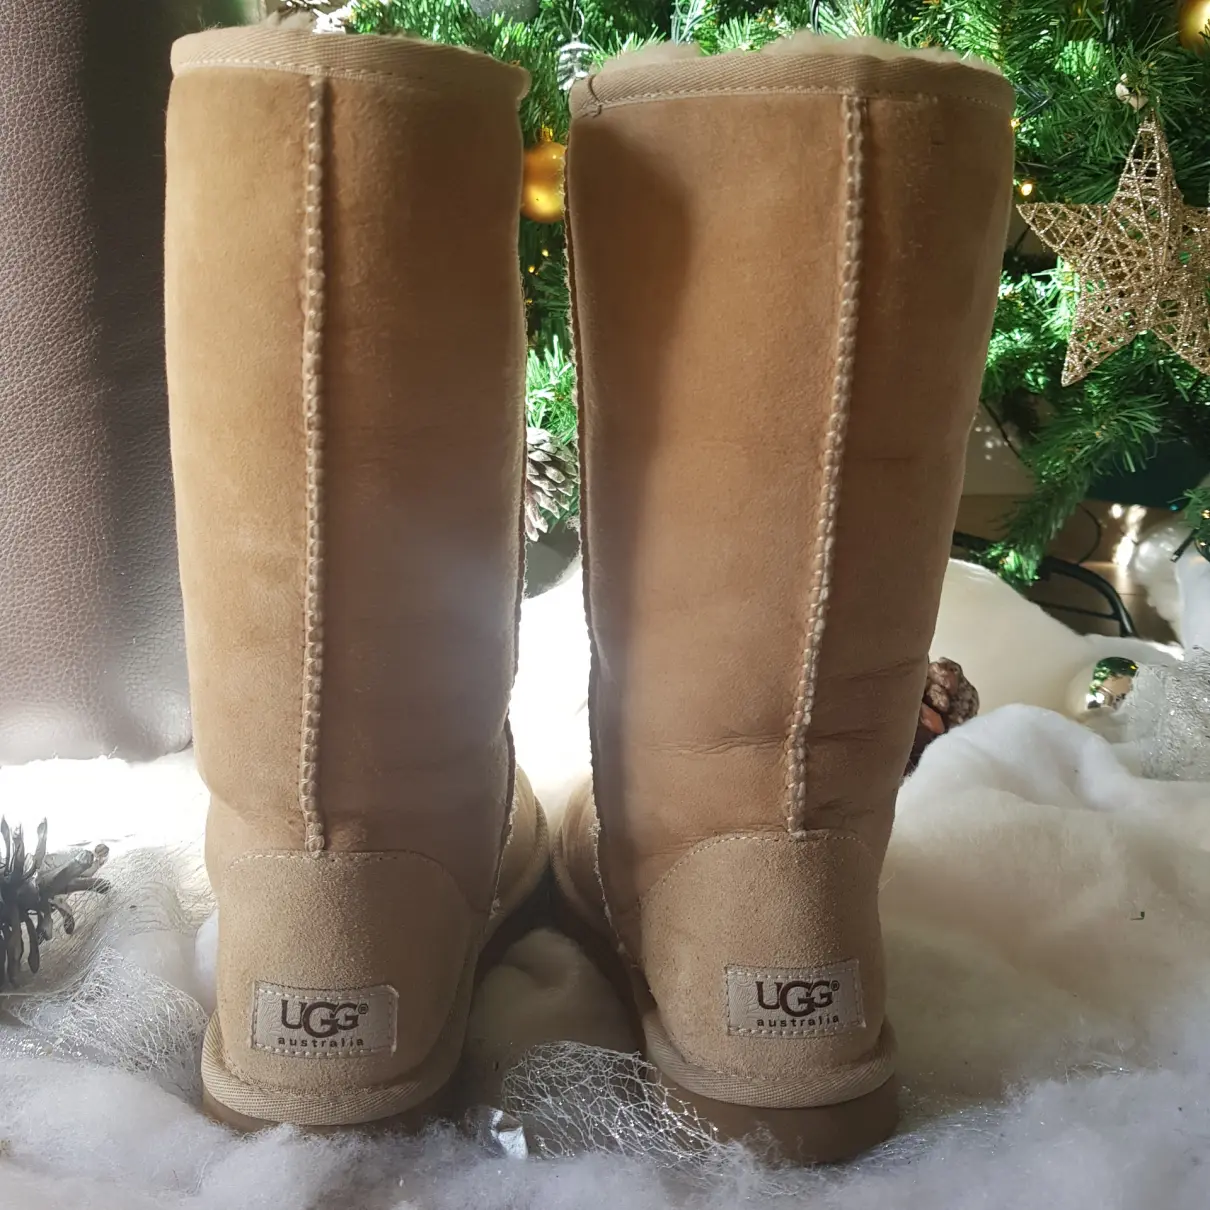 Buy Ugg Shearling snow boots online